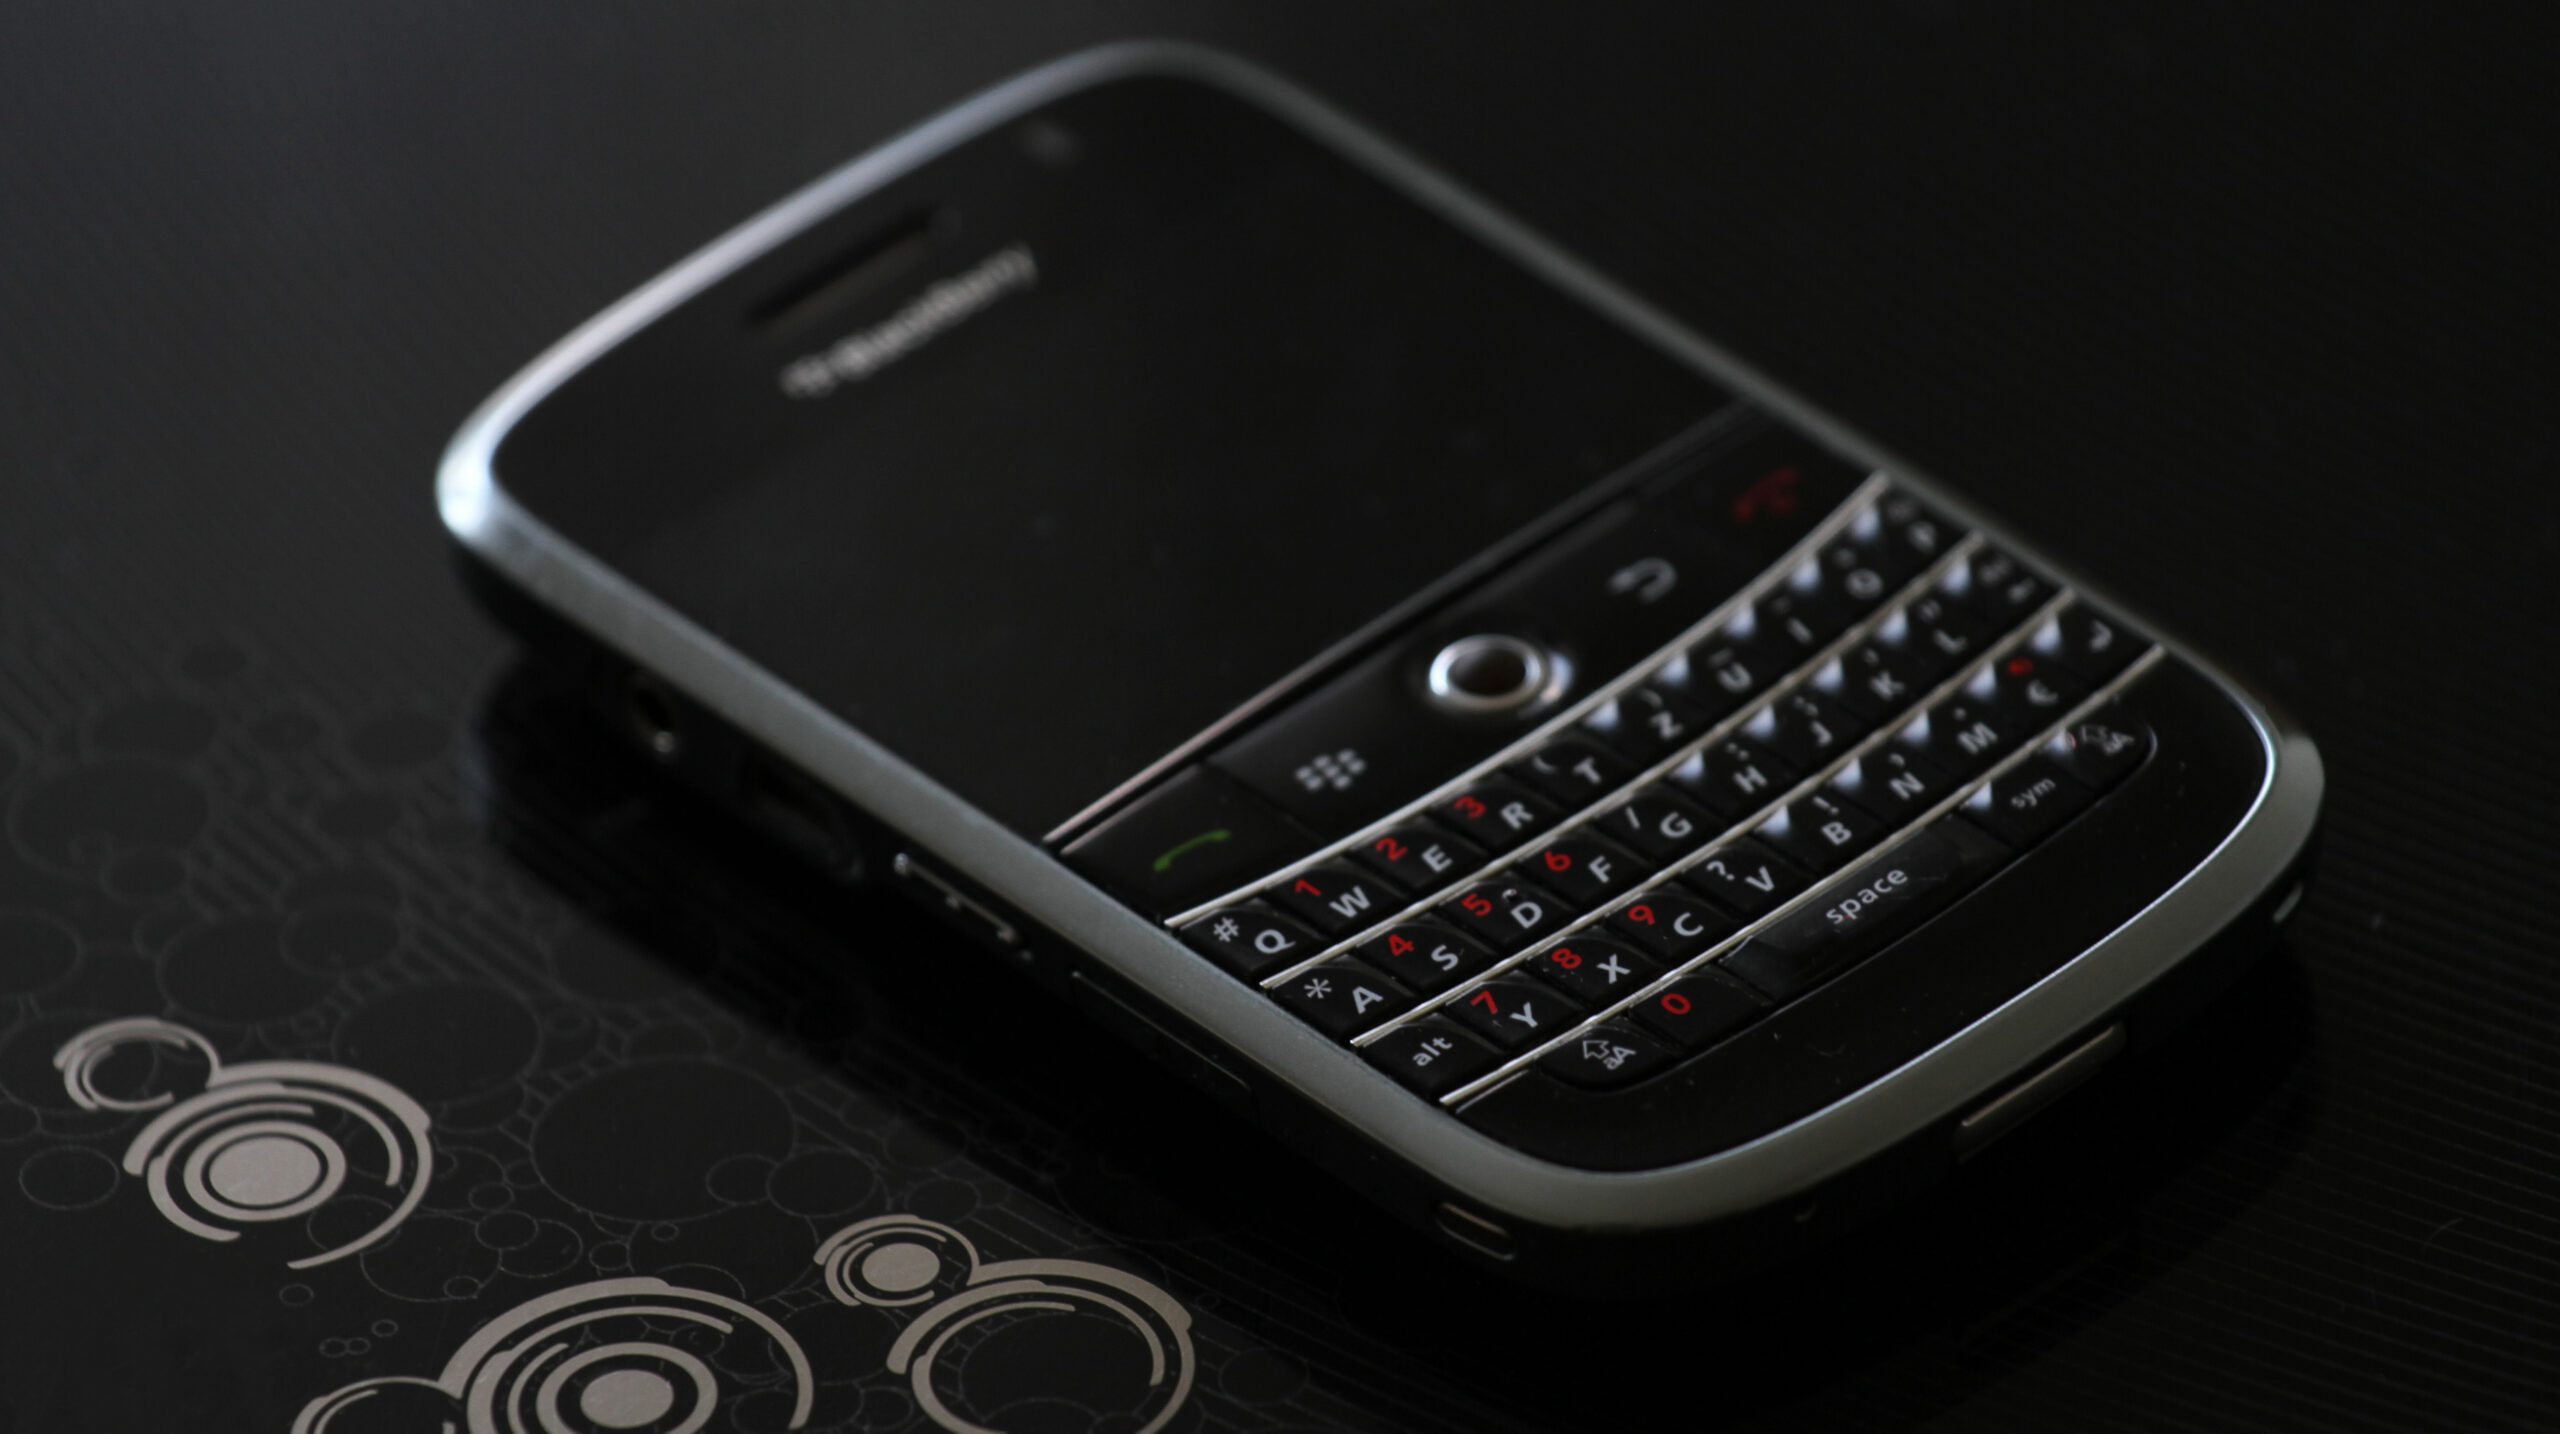 blackberry-bb10-update-brings-new-hub-features-picture-passwords-fm-radio-and-more